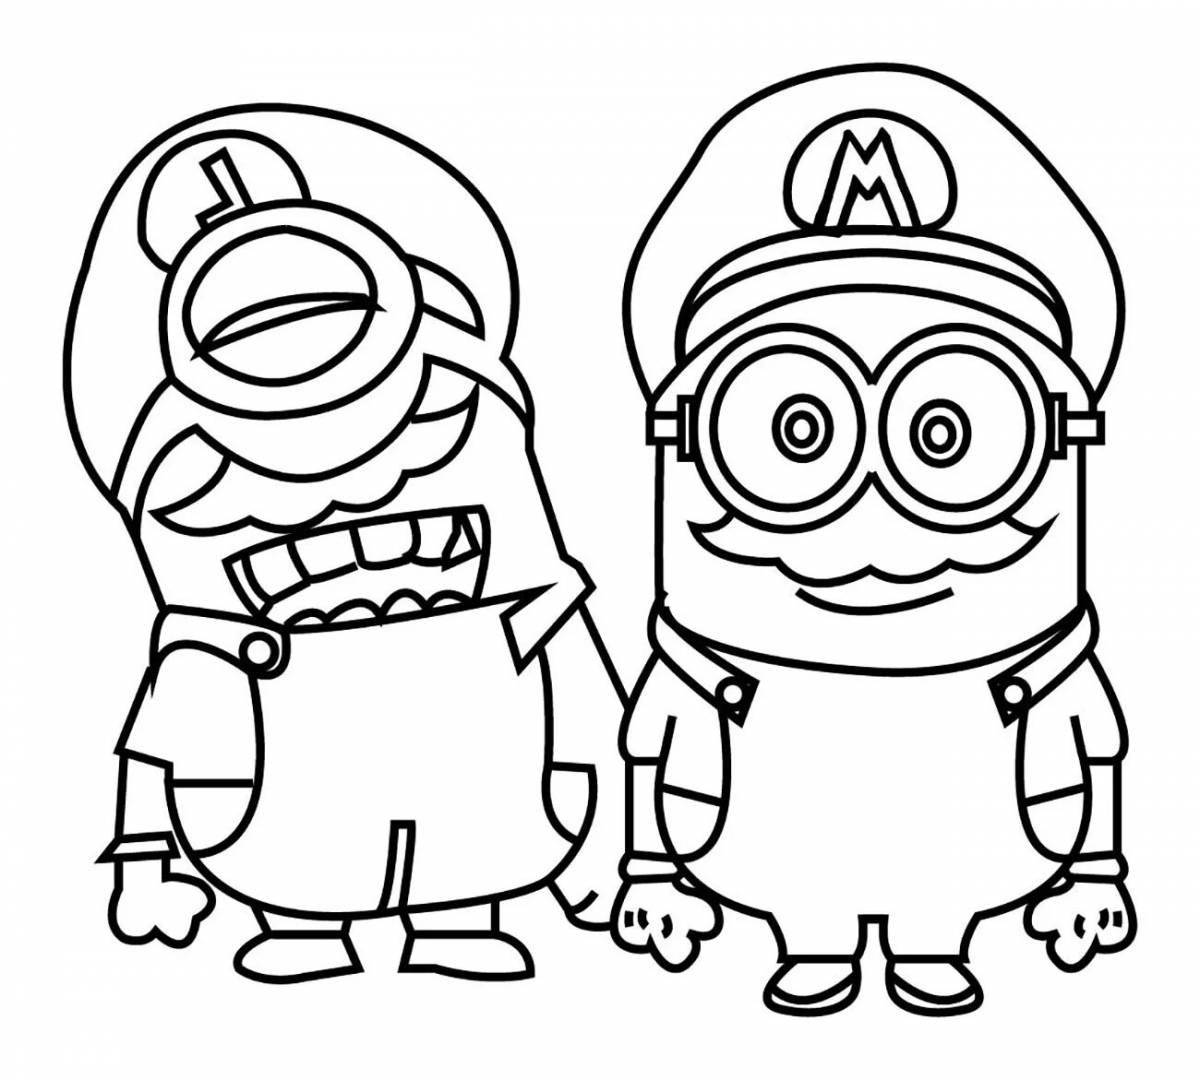 Minions Christmas coloring book